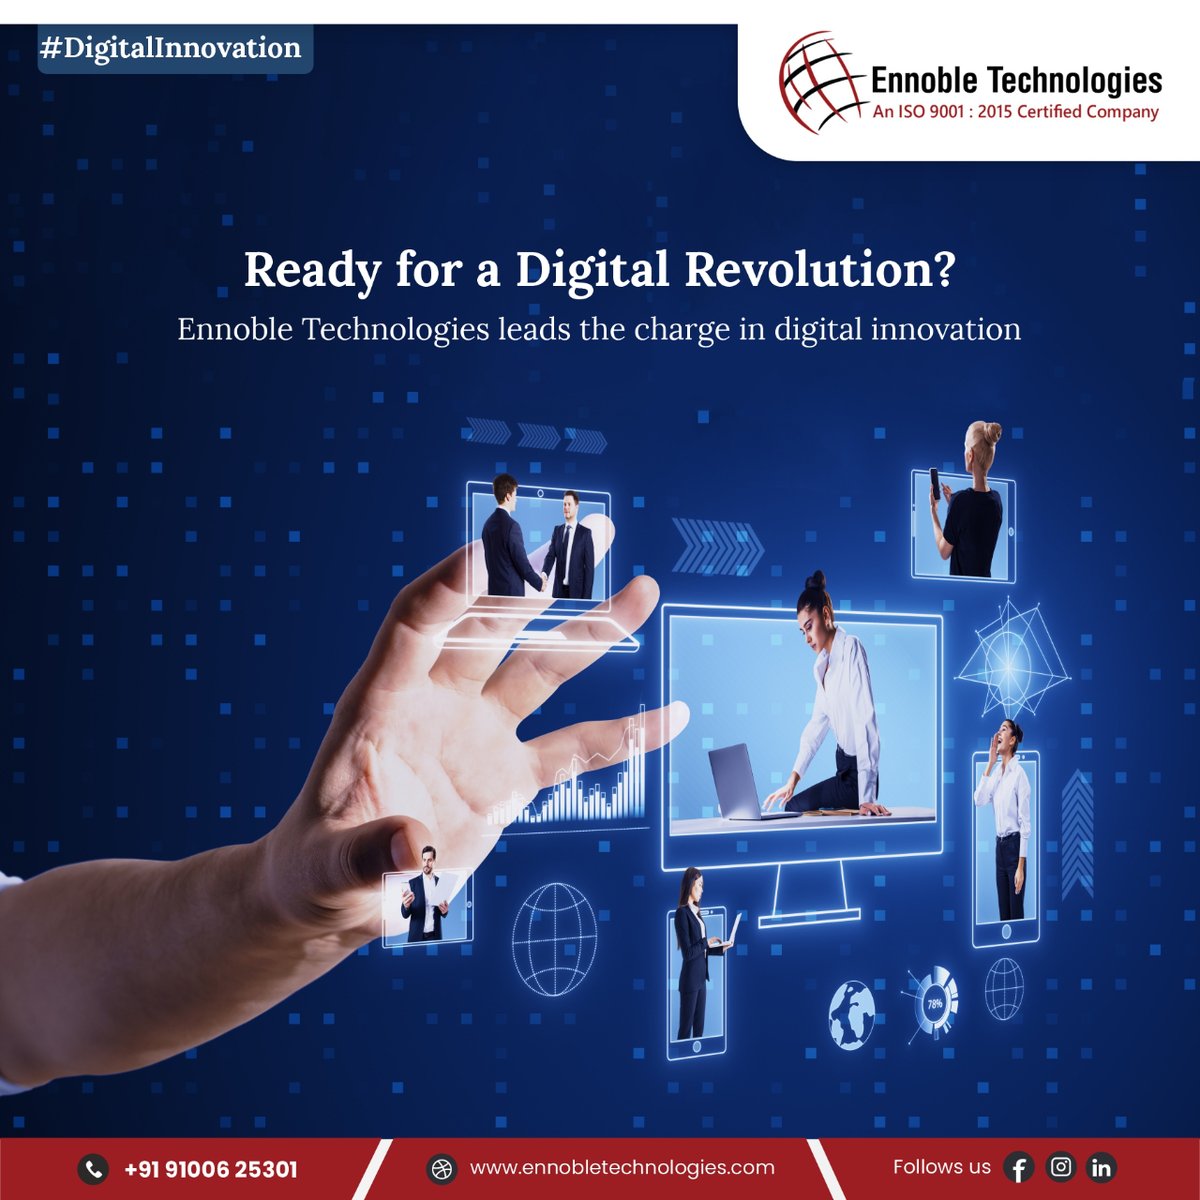 🧑‍💻 Ready for digital revolution 🚀

Ennoble Technologies leads the charge in #DigitalInnovation. Embrace the future of business with our transformative  #TechSolutions. Join the revolution now! 

Email us: info@ennobletechnologies.com

#TechRevolutions #EnnobleTechnologies